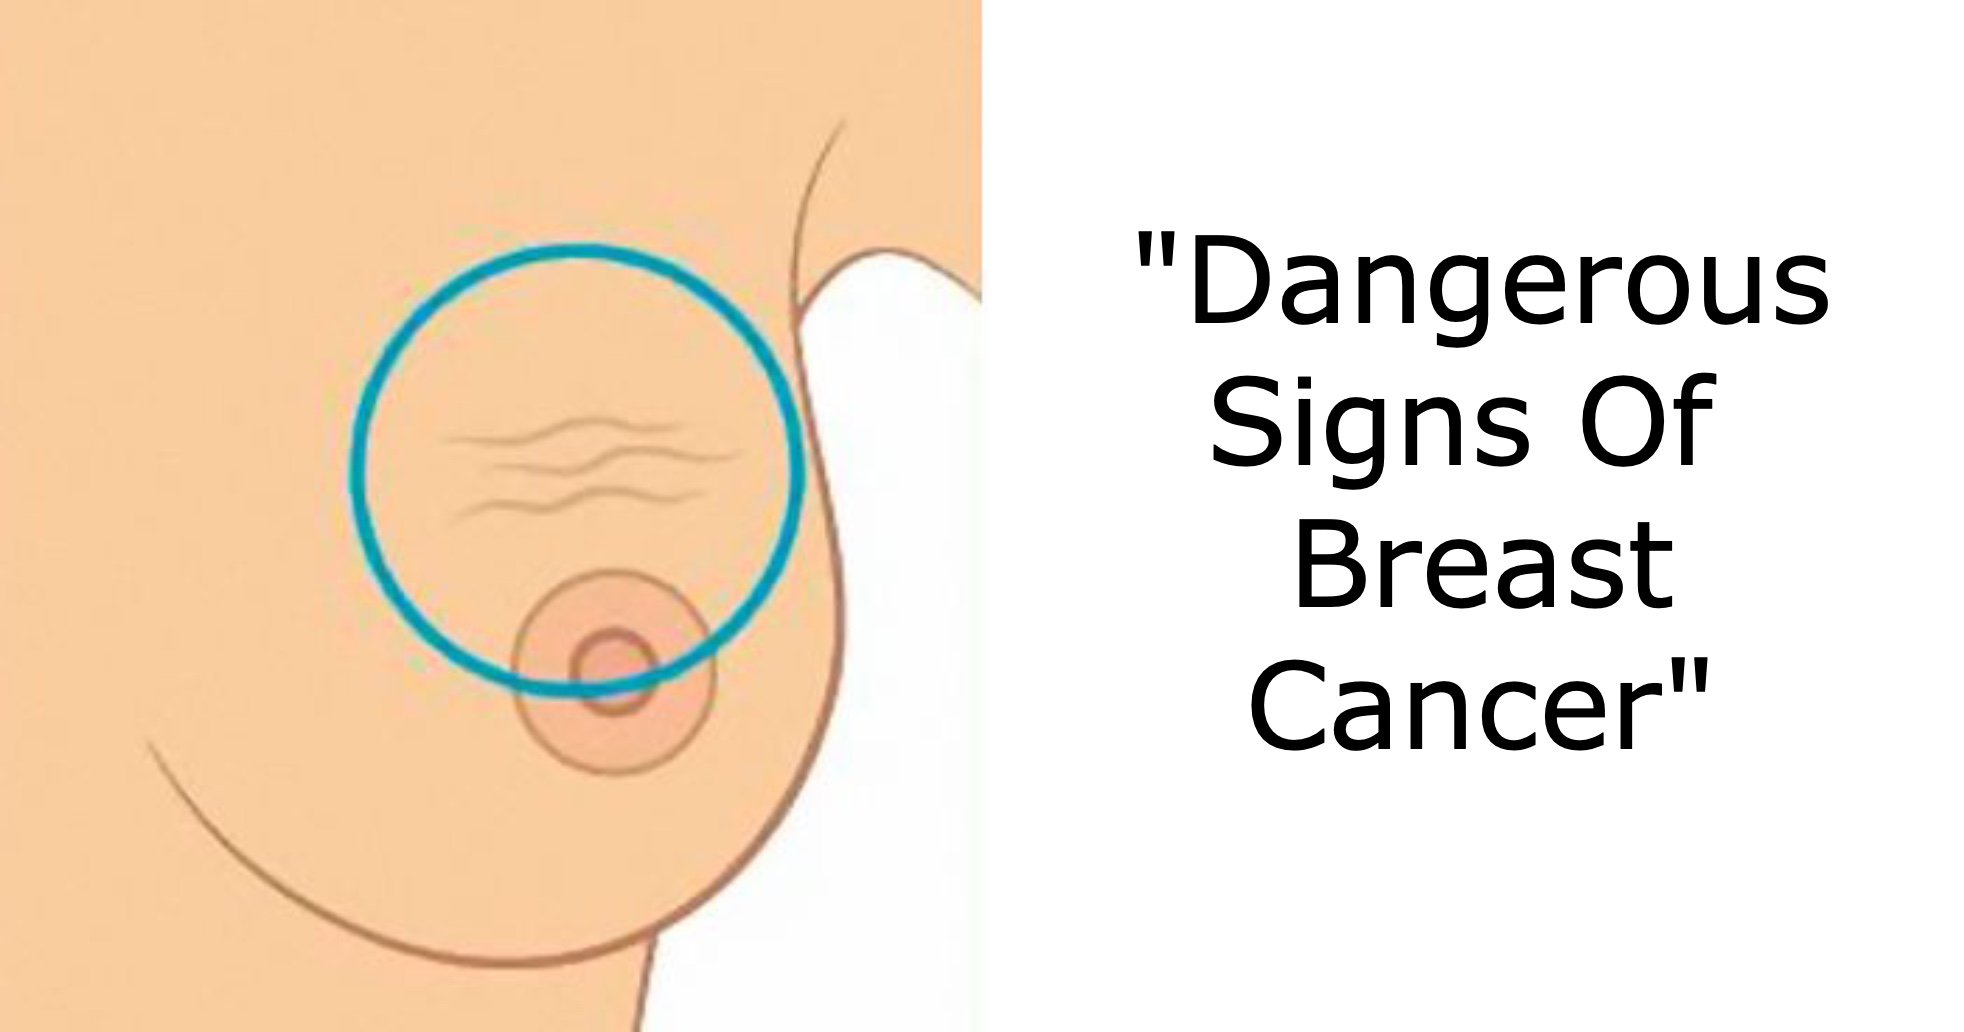 breast cane.jpg?resize=1200,630 - 9 Common Warning Signs Of Breast Cancer That People Often Ignore